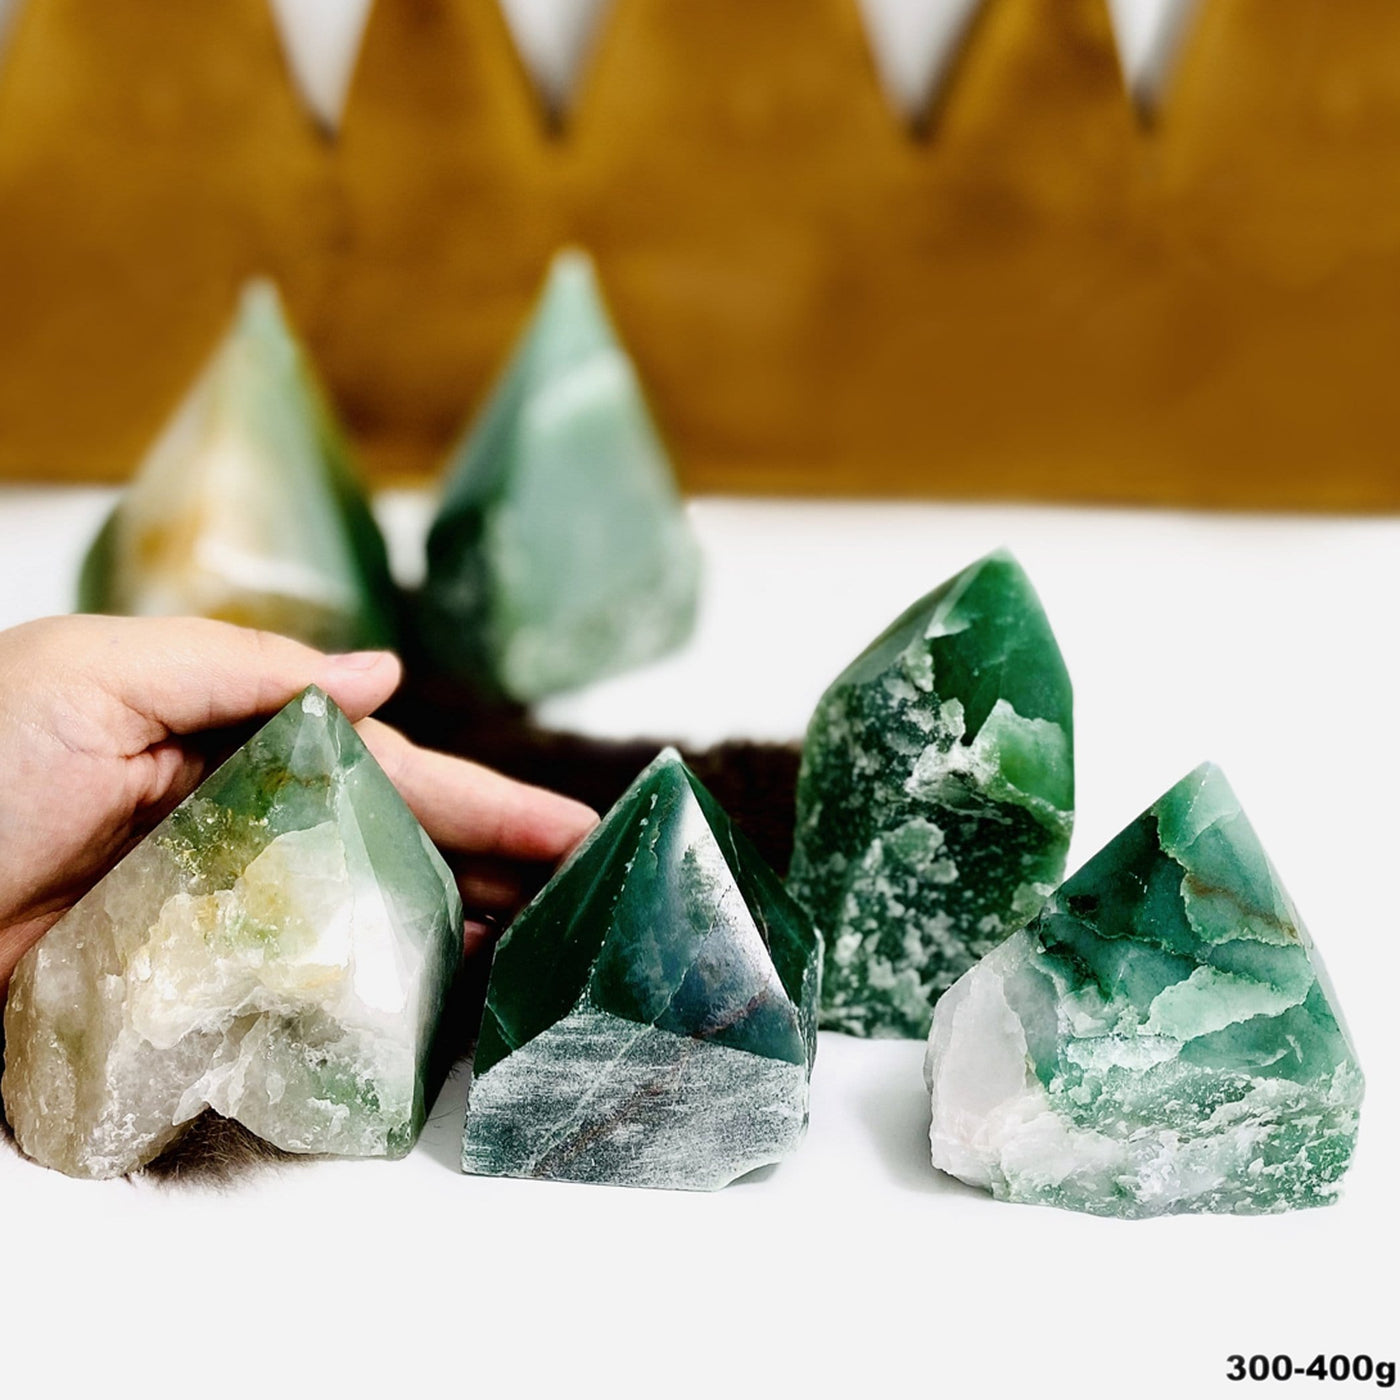 Assortment of green and white quartz semi polished points.  They are polished on top and rough along the sides.  They have a cut base so they can stand on their own.